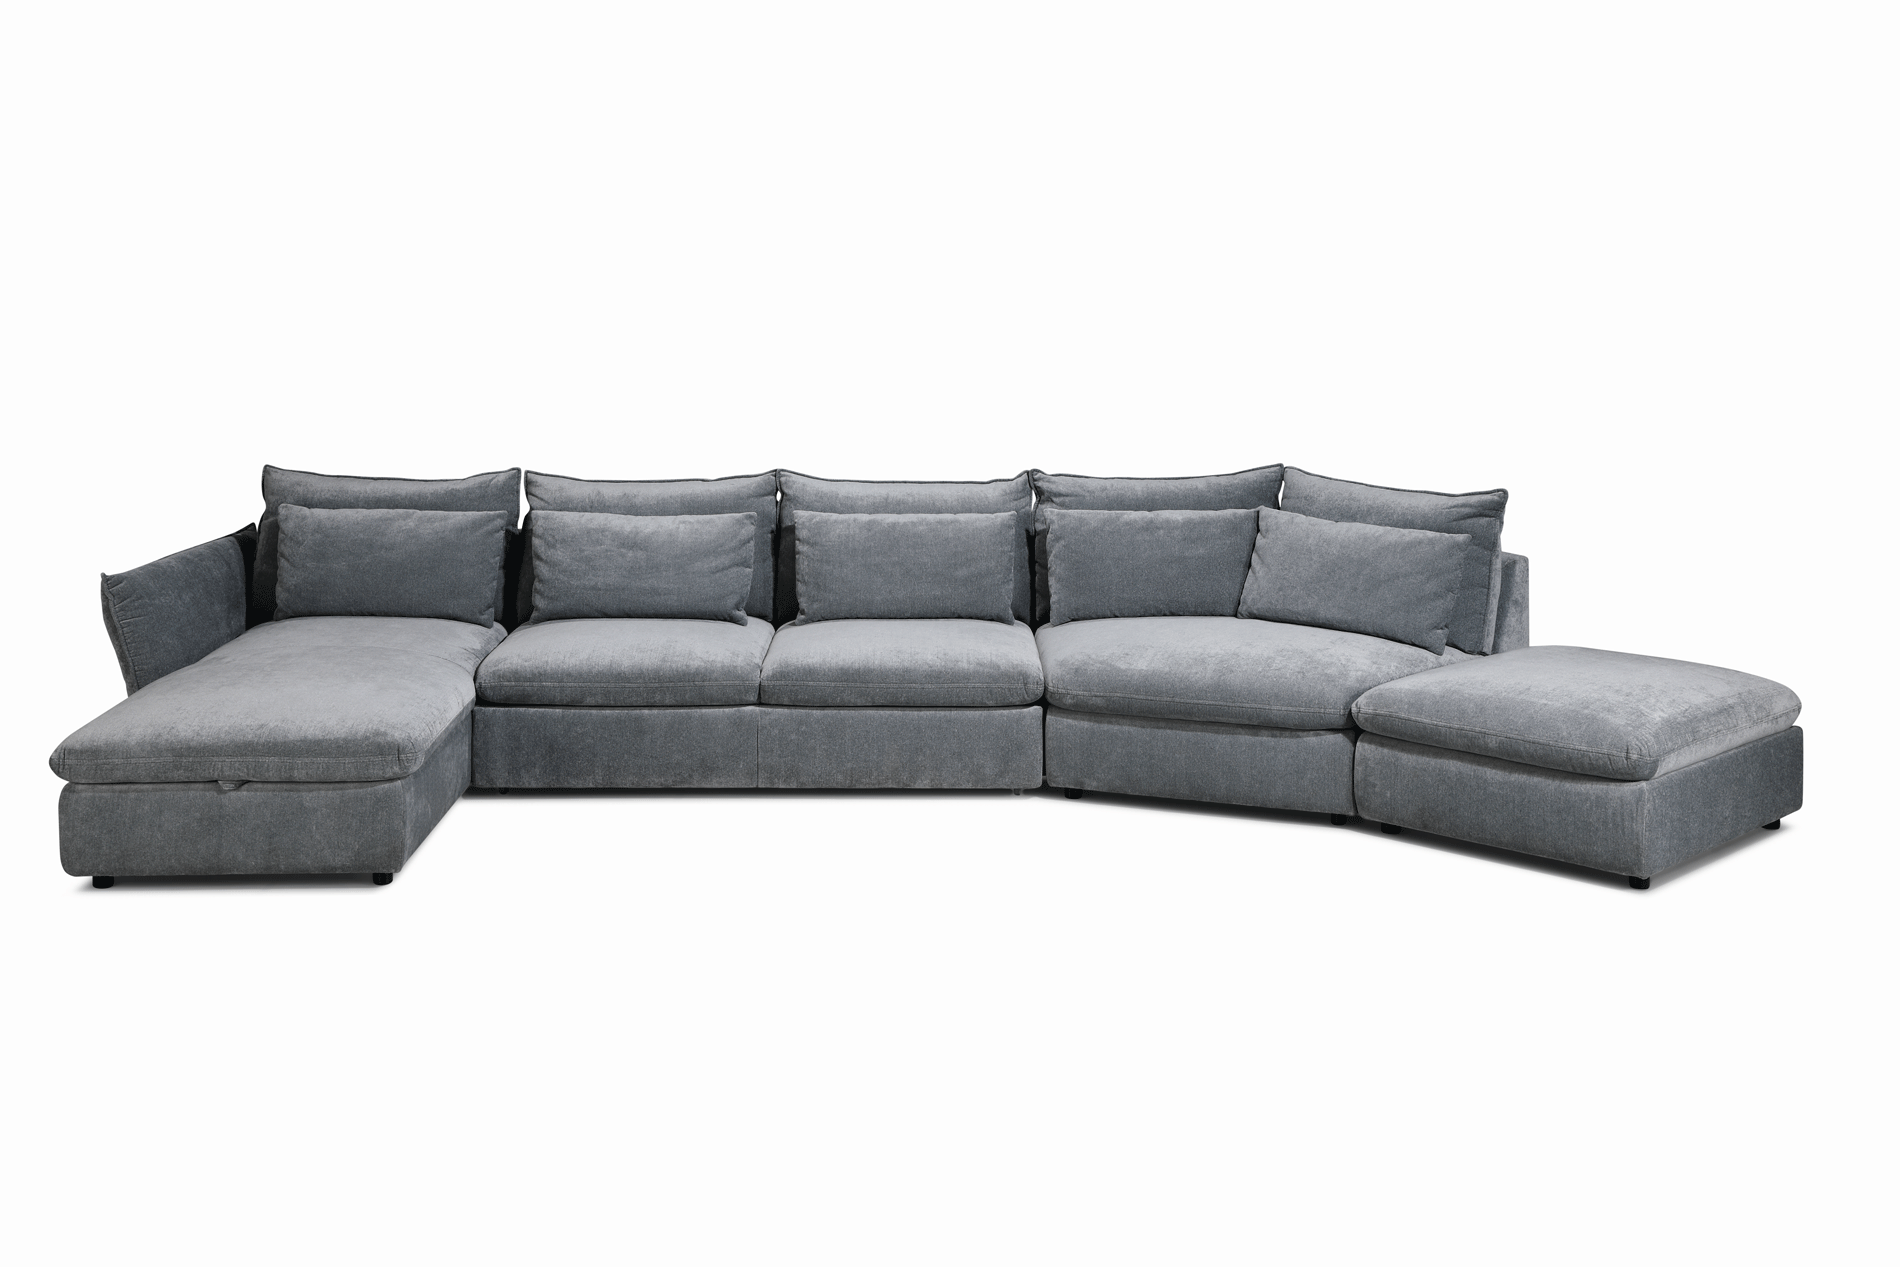 Brands ALF Capri Coffee Tables, Italy Idylla Sectional w/ Bed & storage